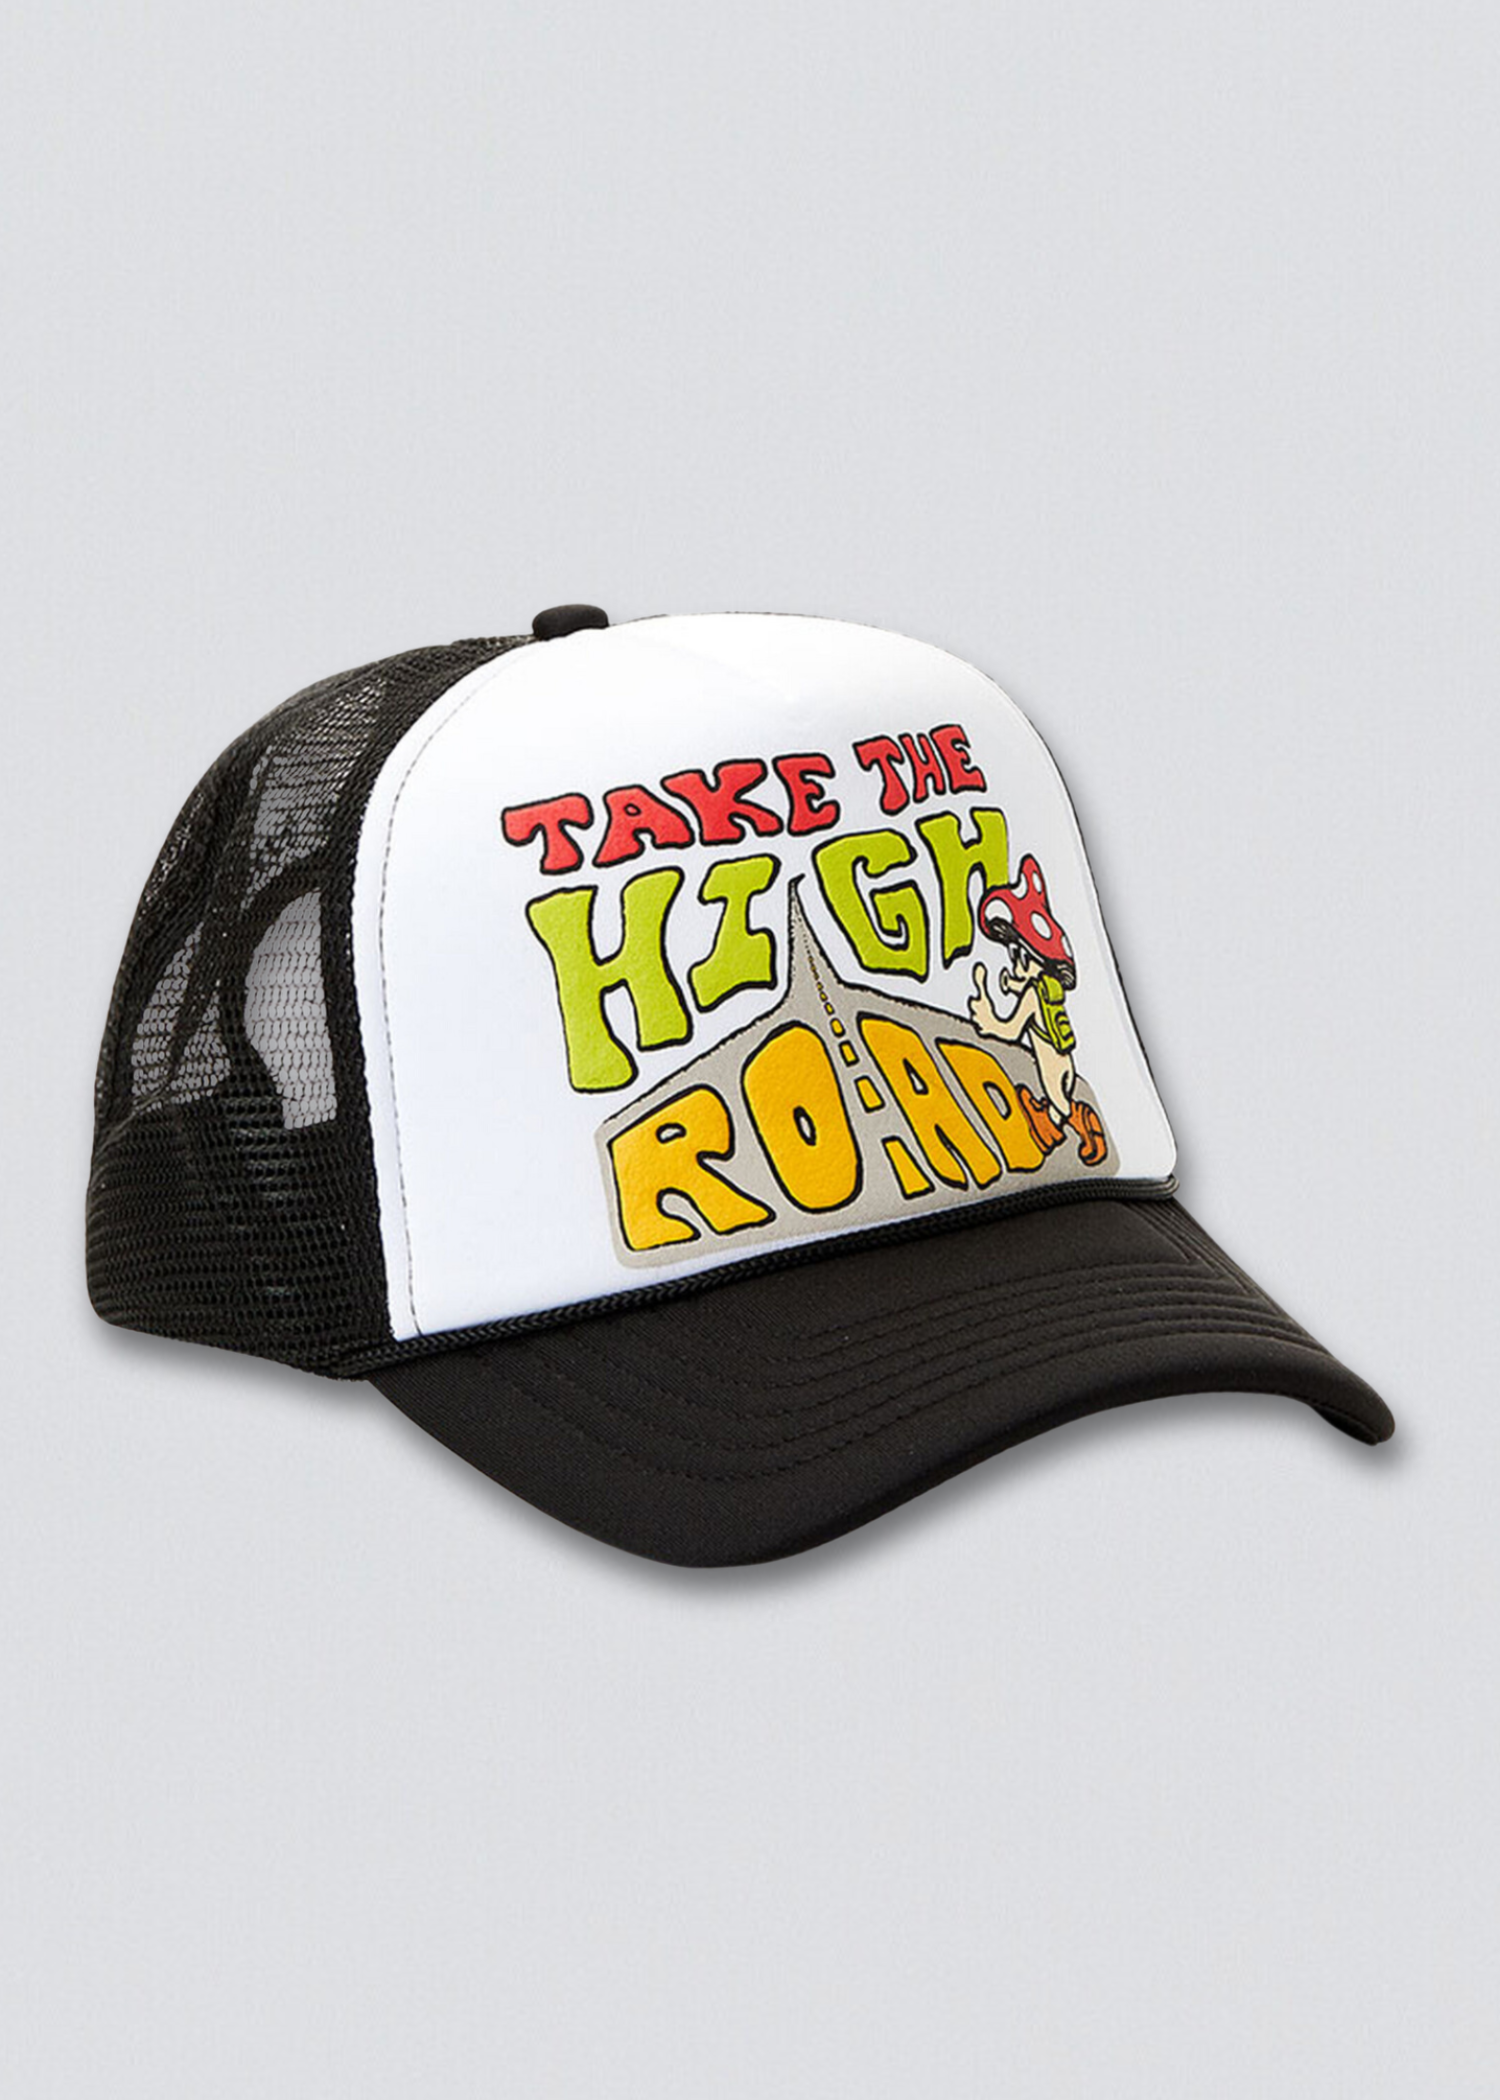 Take the High Road Trucker Hat